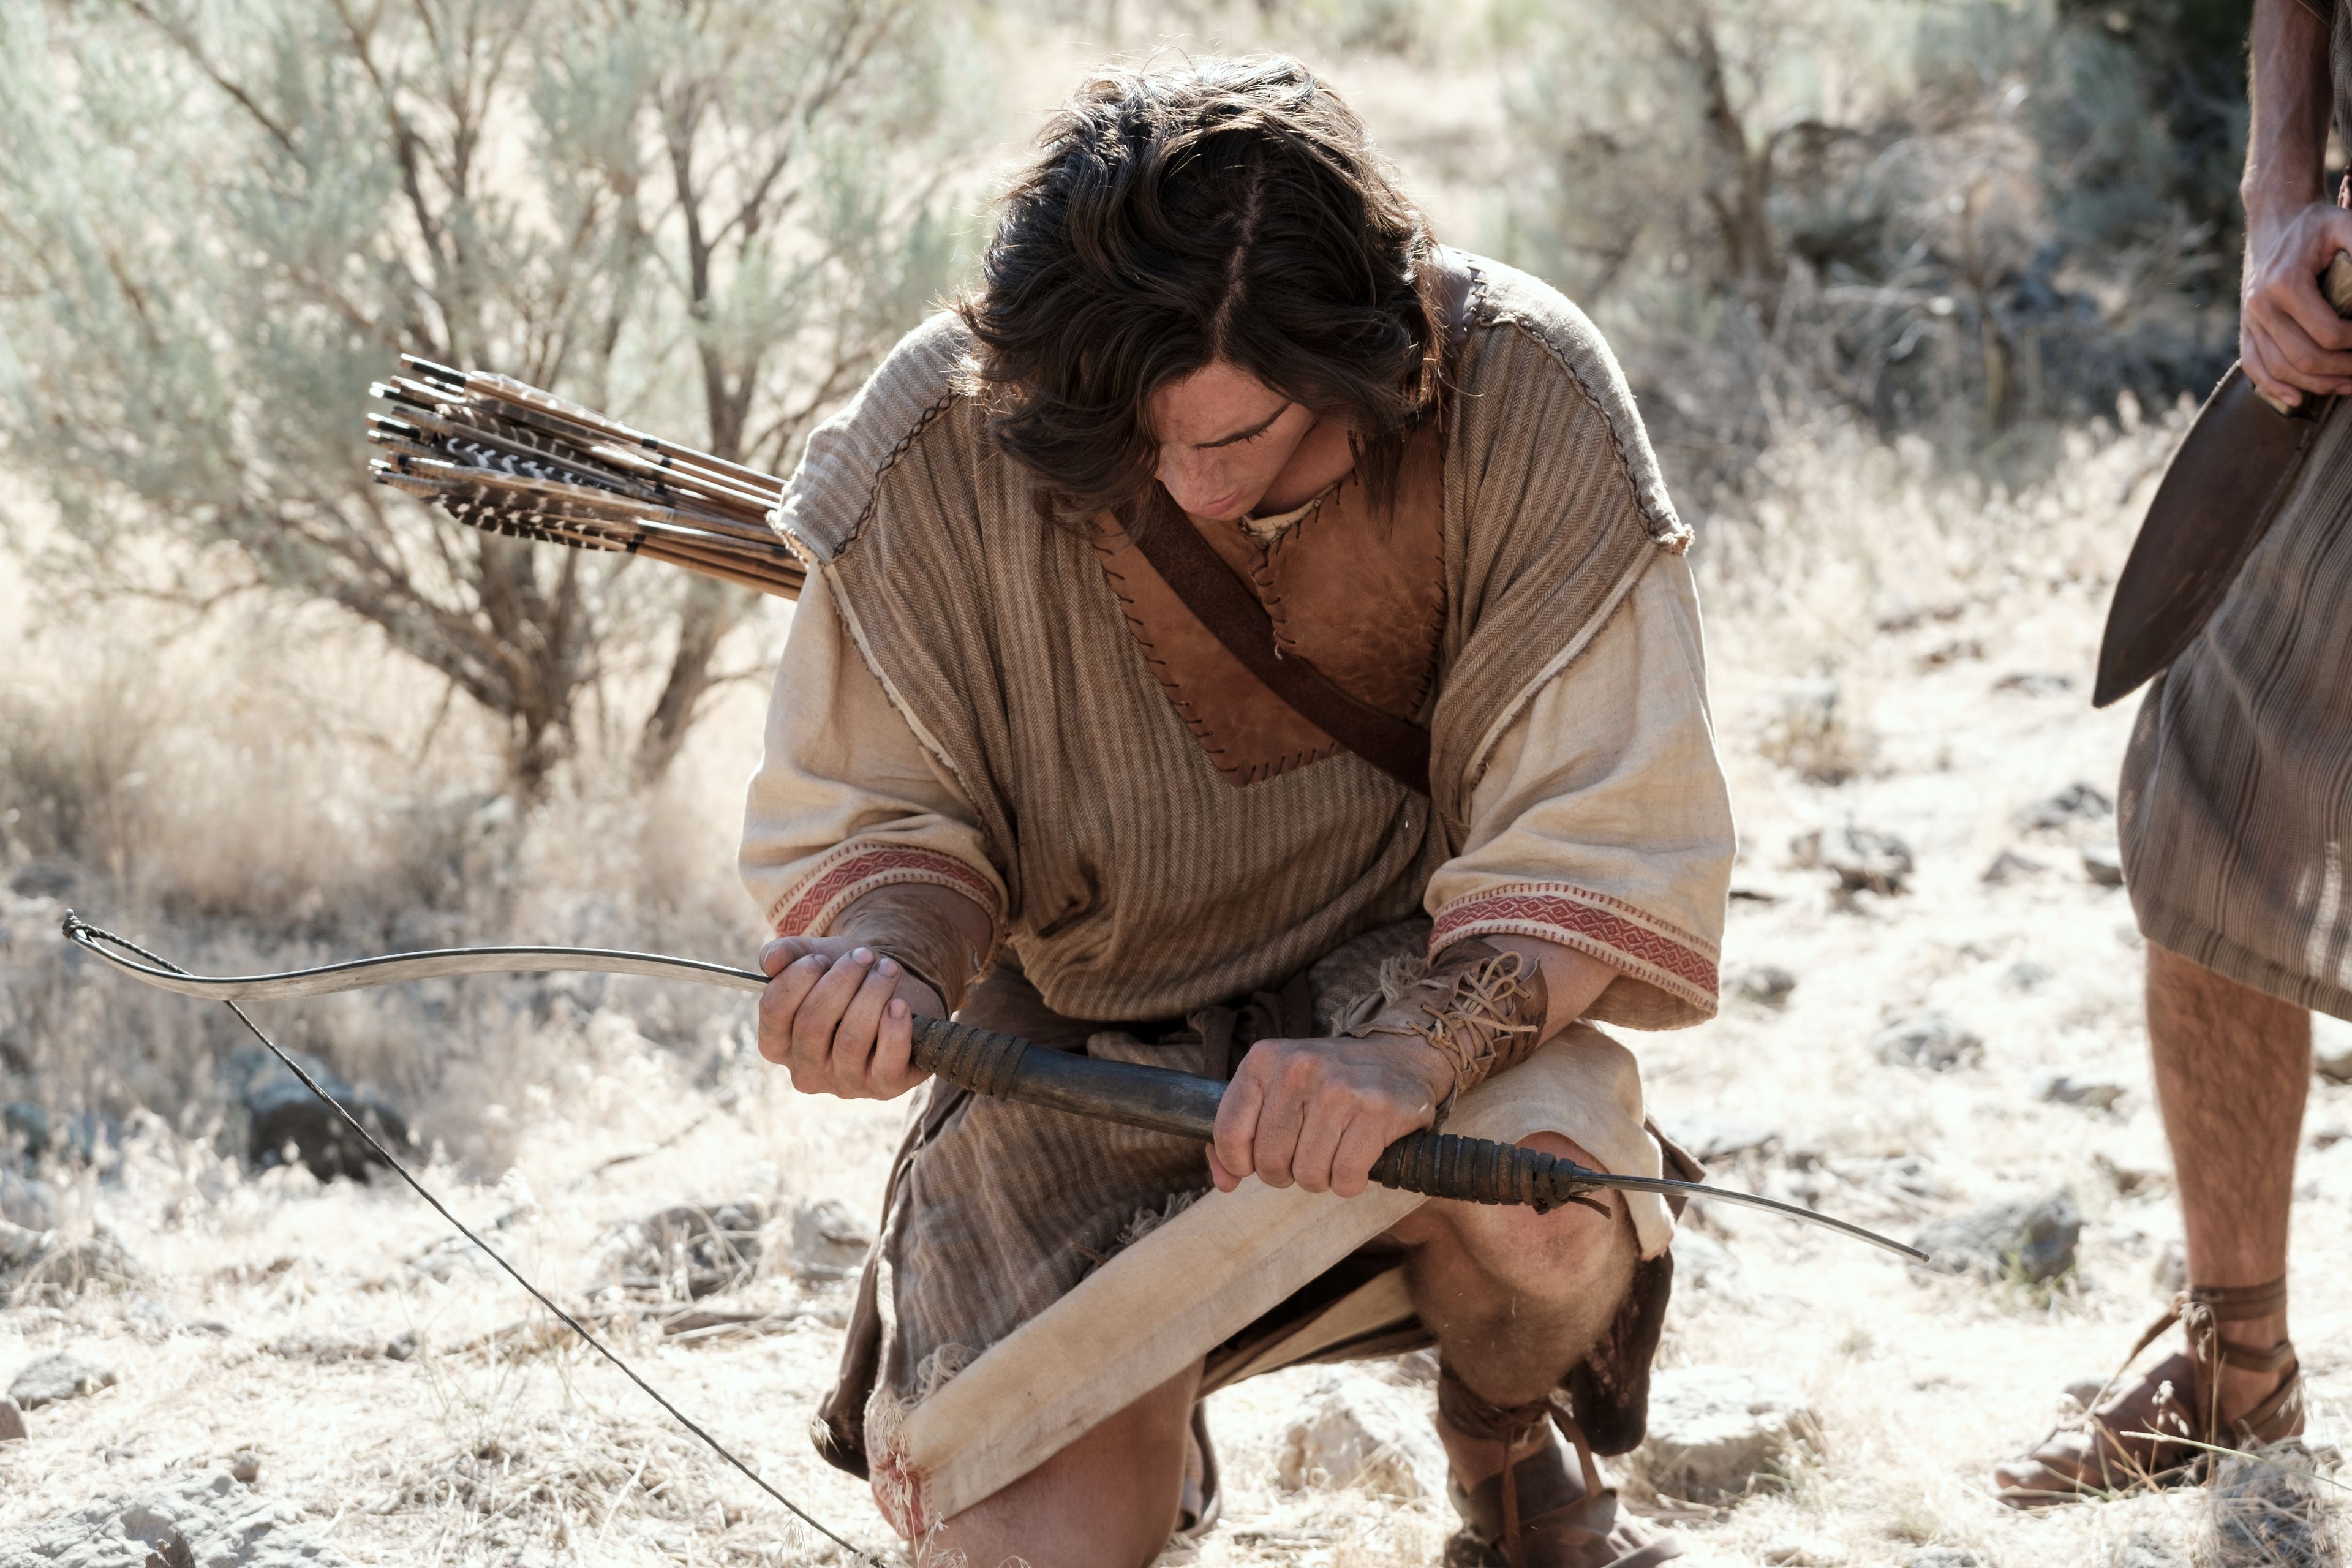 Nephi breaks his bow in the wilderness.